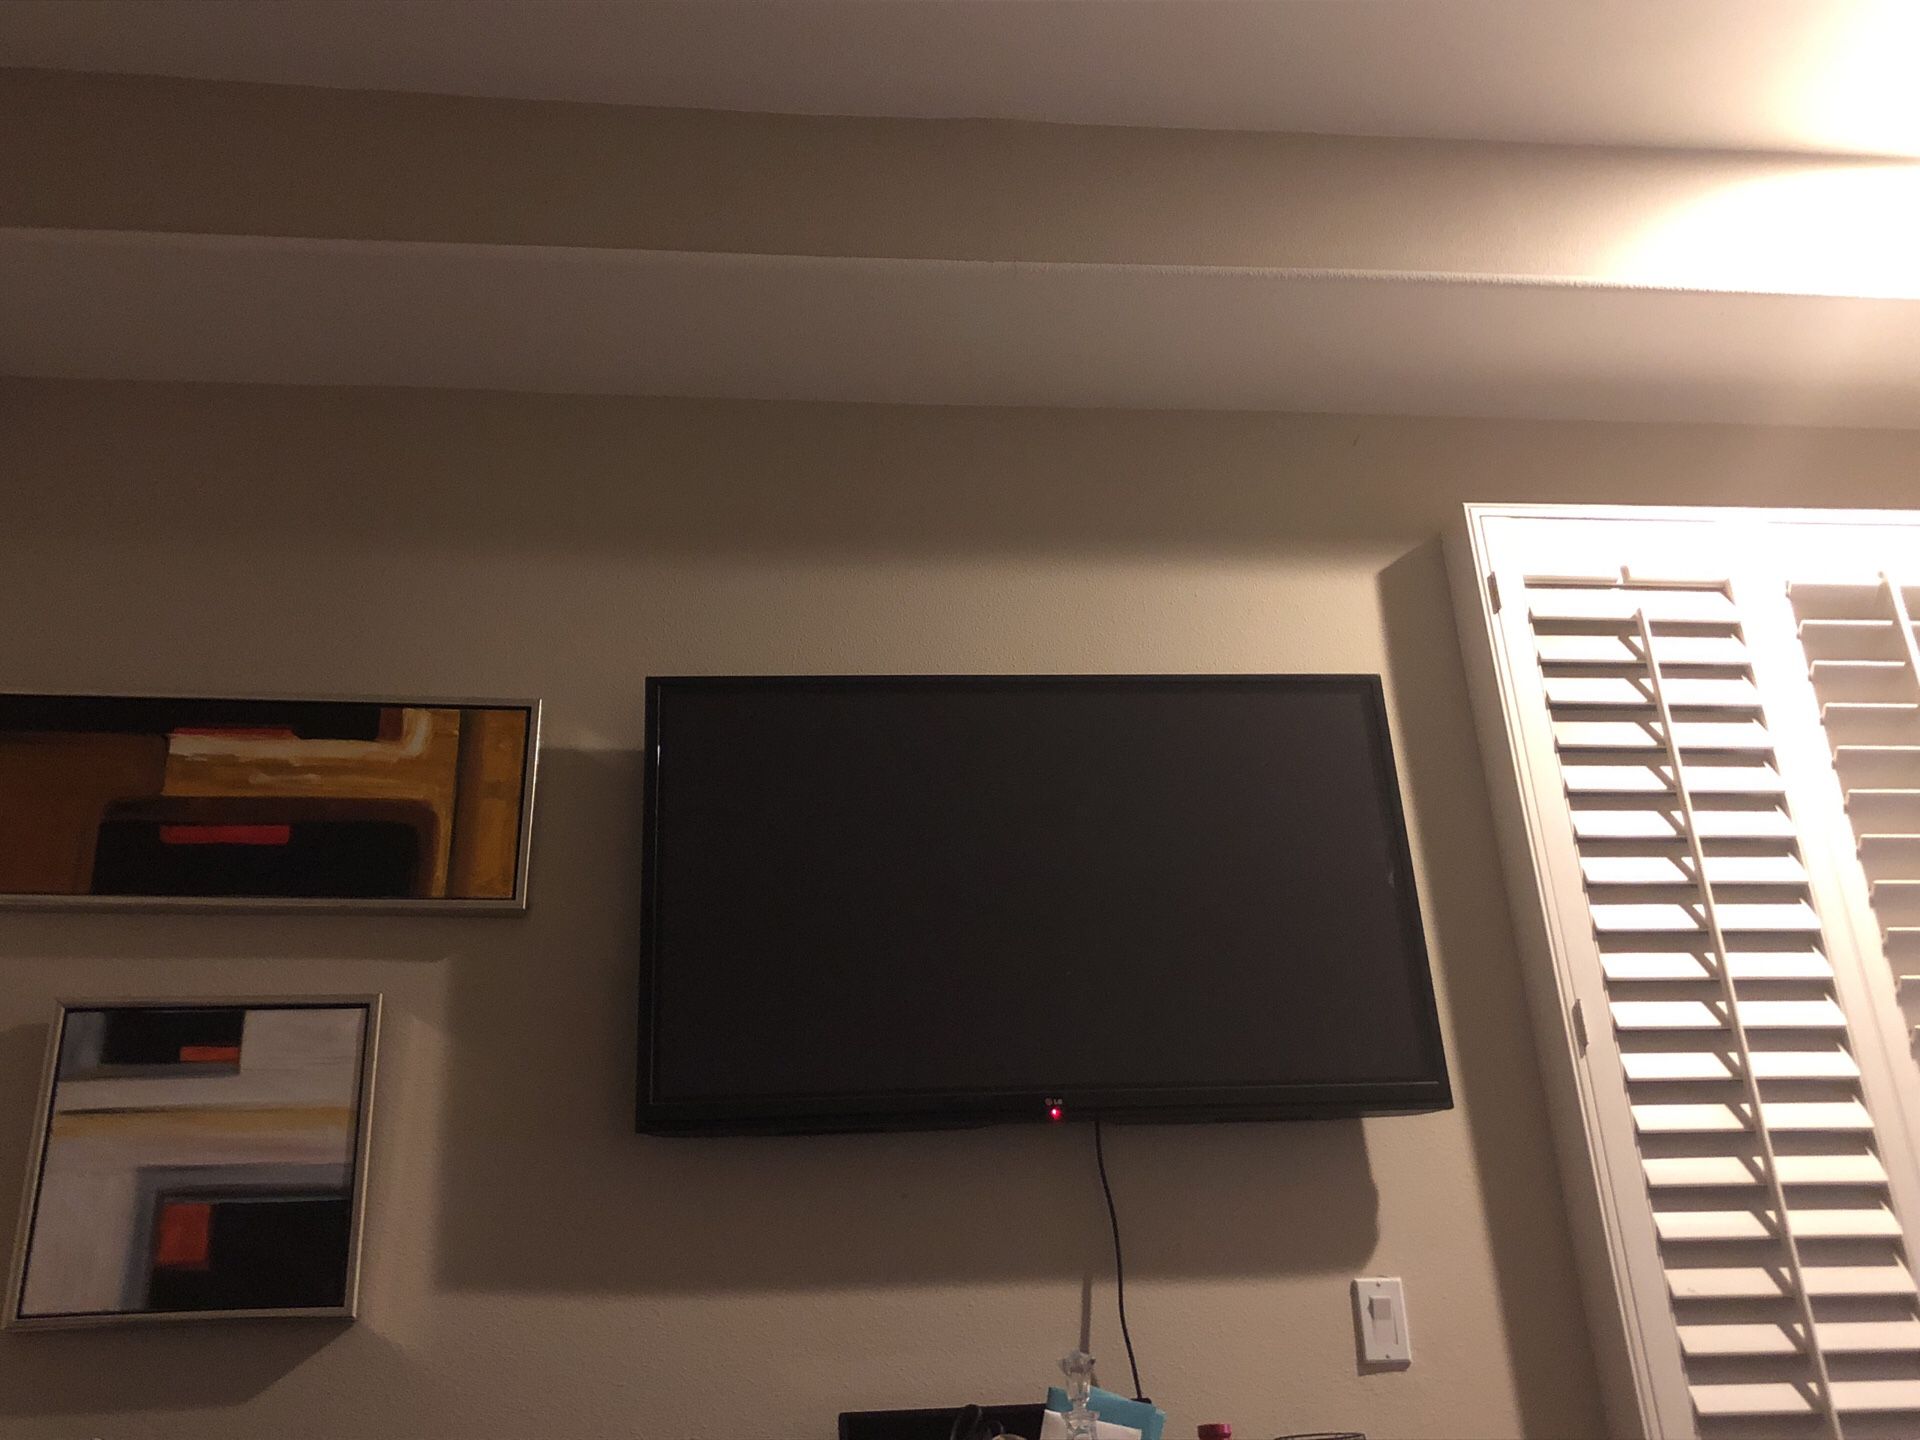 TV - led lights out ($100 or willing to negotiate)